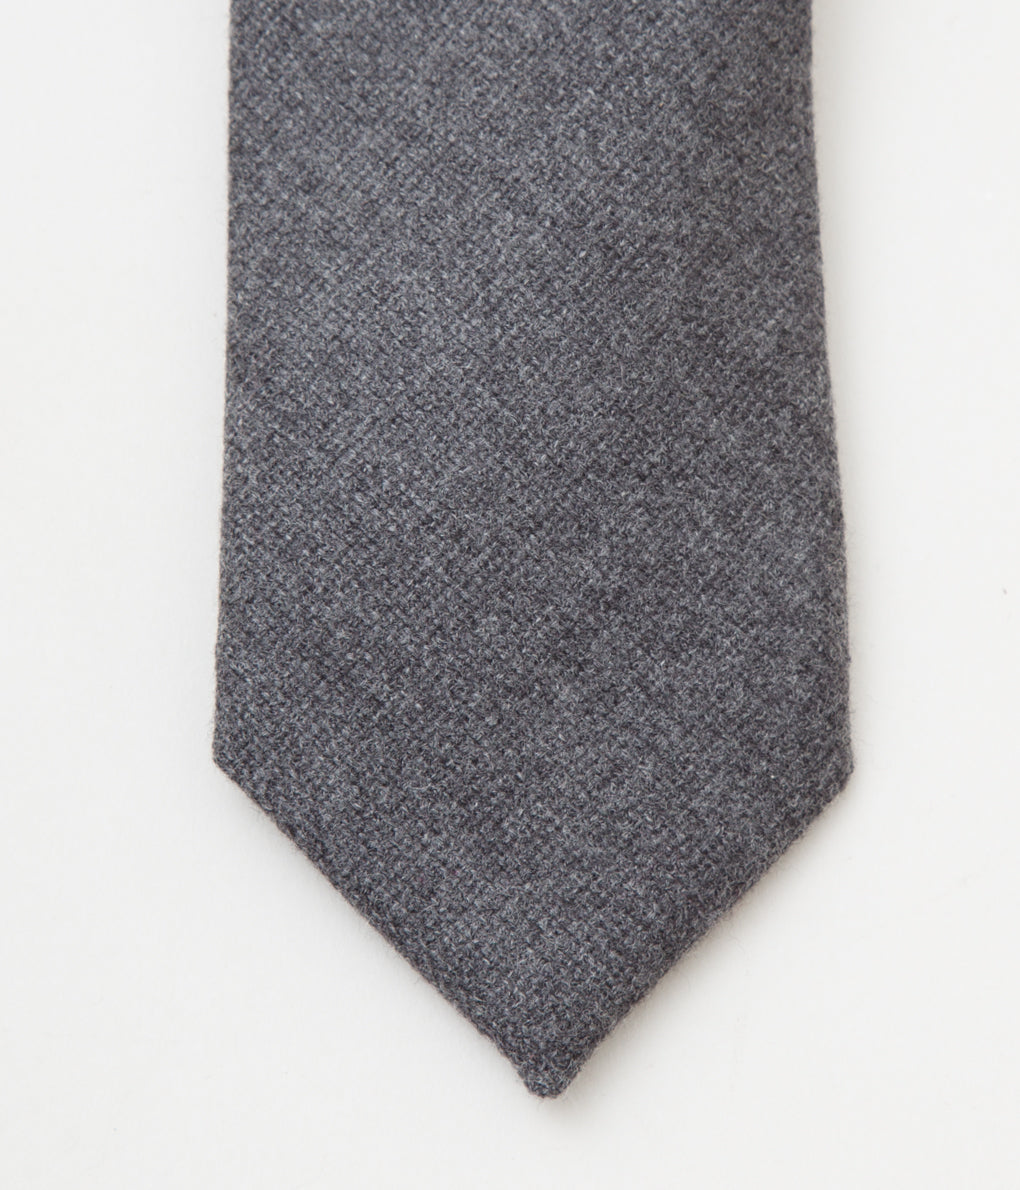 FINE AND DANDY "TIES "(CHARCOAL WOOL)